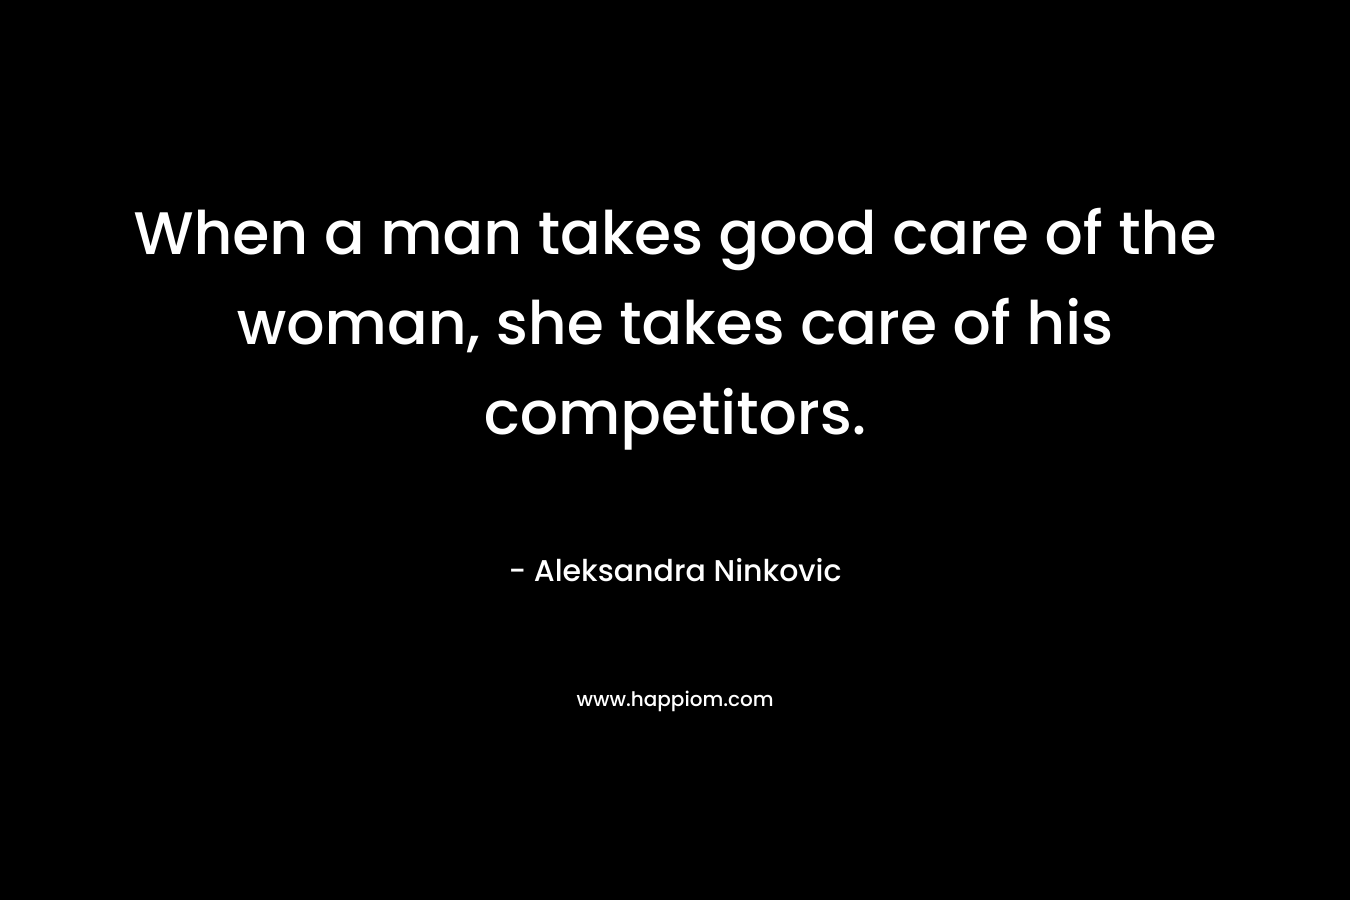 When a man takes good care of the woman, she takes care of his competitors.